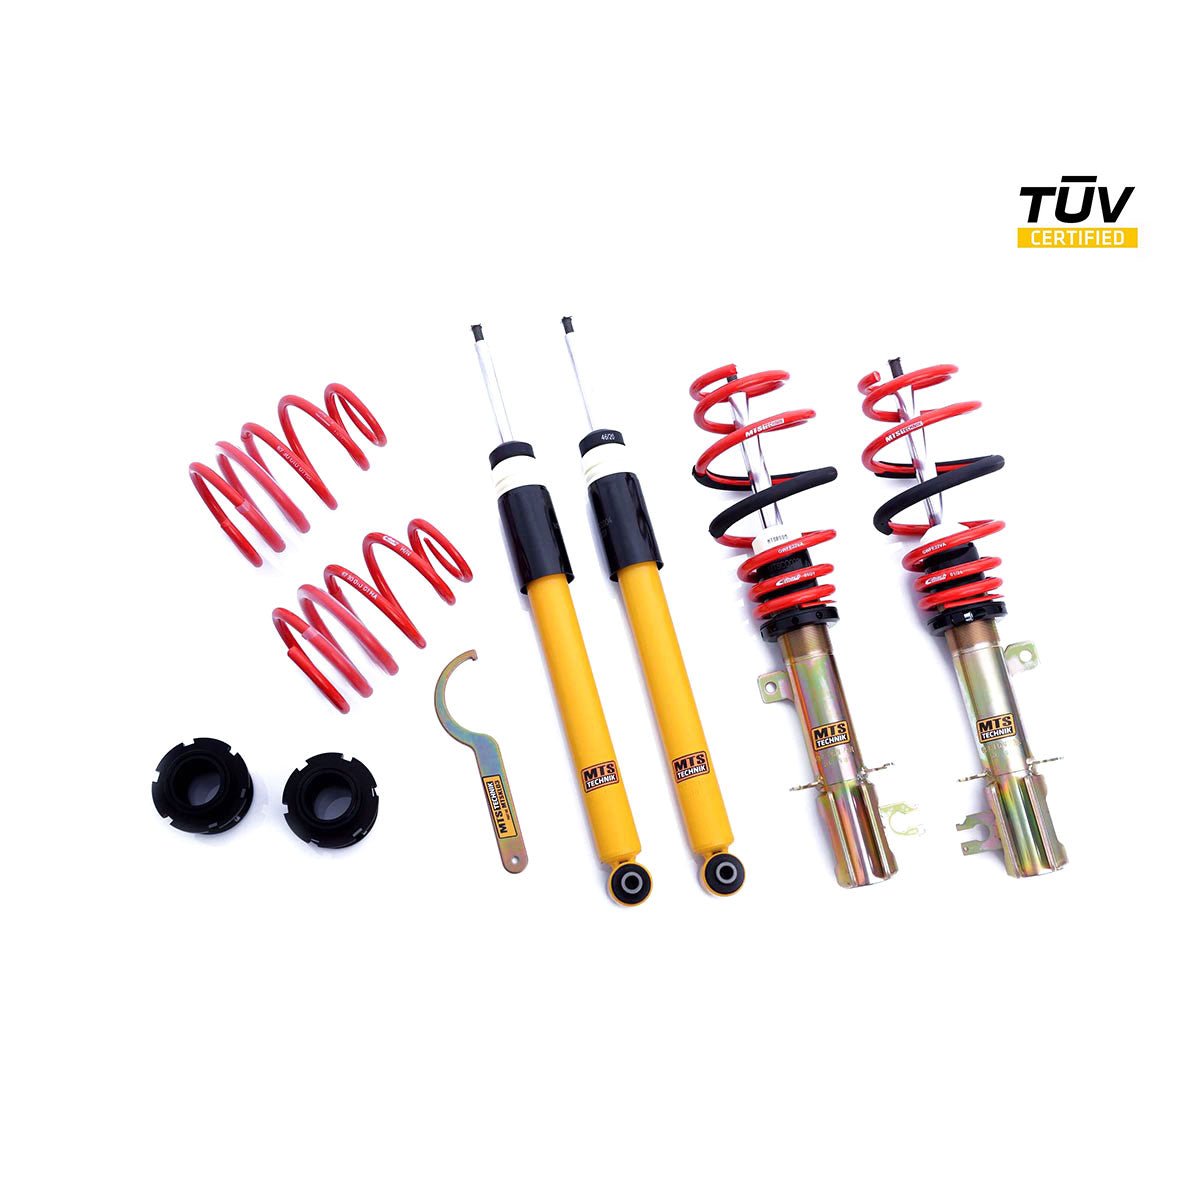 MTS TECHNIK coilover kit SPORT Opel Adam (with TÜV) - PARTS33 GmbH